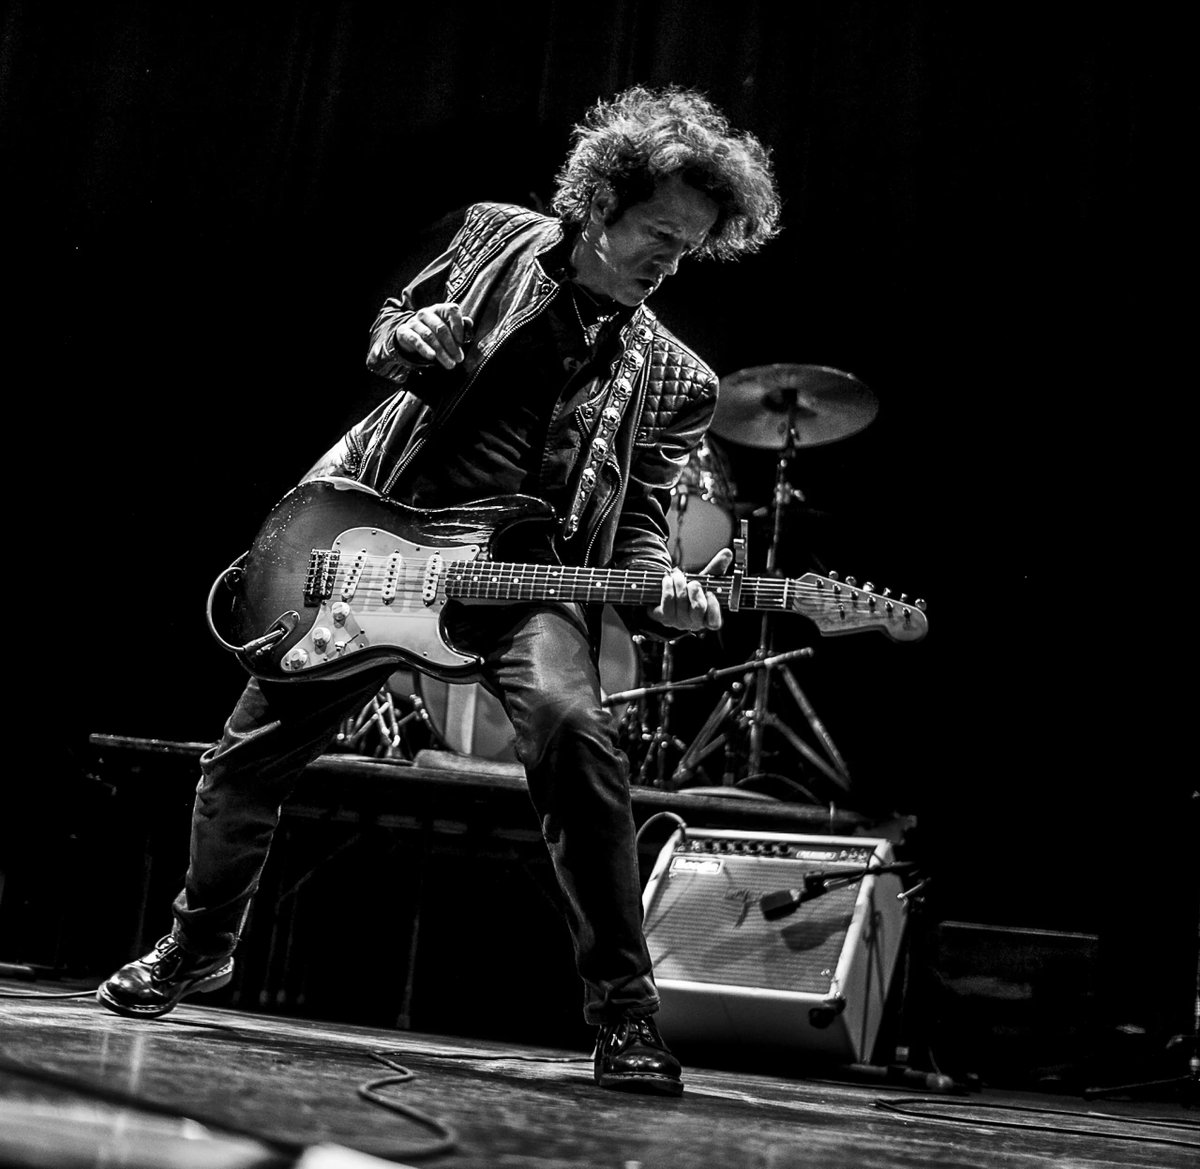 The #NewYorkTimes called #WillieNile “one of the most gifted #singersongwriters to emerge from the #NewYork scene in years.” @uncutmagazine called him “A one-man Clash.” He’s a real rock ‘n’ roller who, even into his 70s. #OnThisDay 2009 @willienile House of a Thousand Guitars